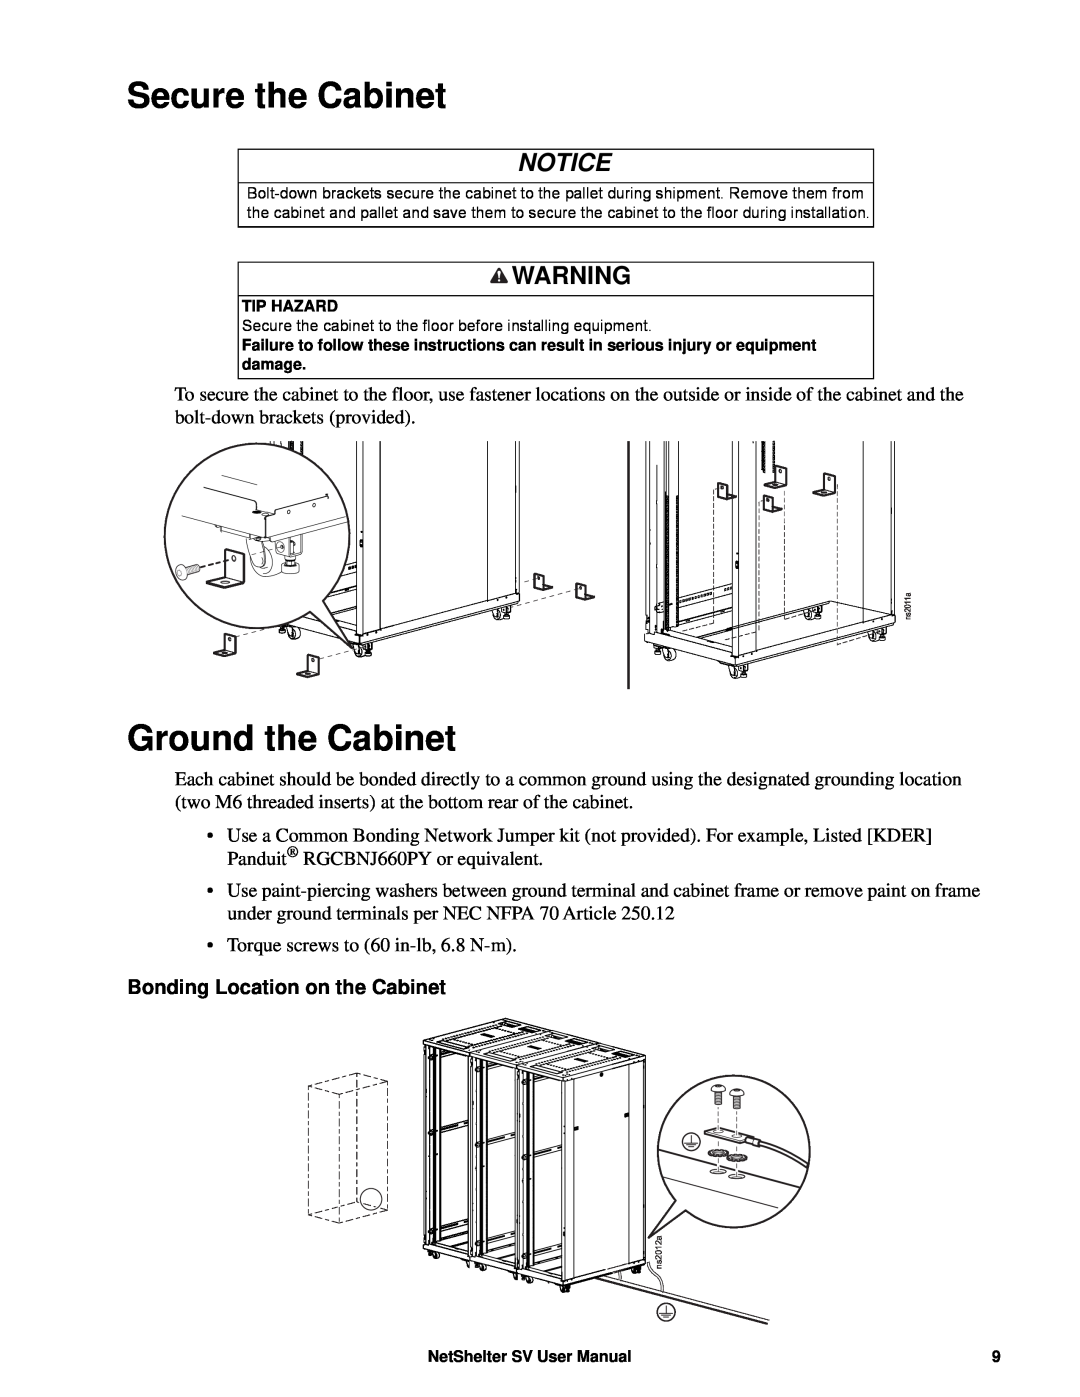 APC AR2400 user manual Secure the Cabinet, Ground the Cabinet, Notice, Bonding Location on the Cabinet 